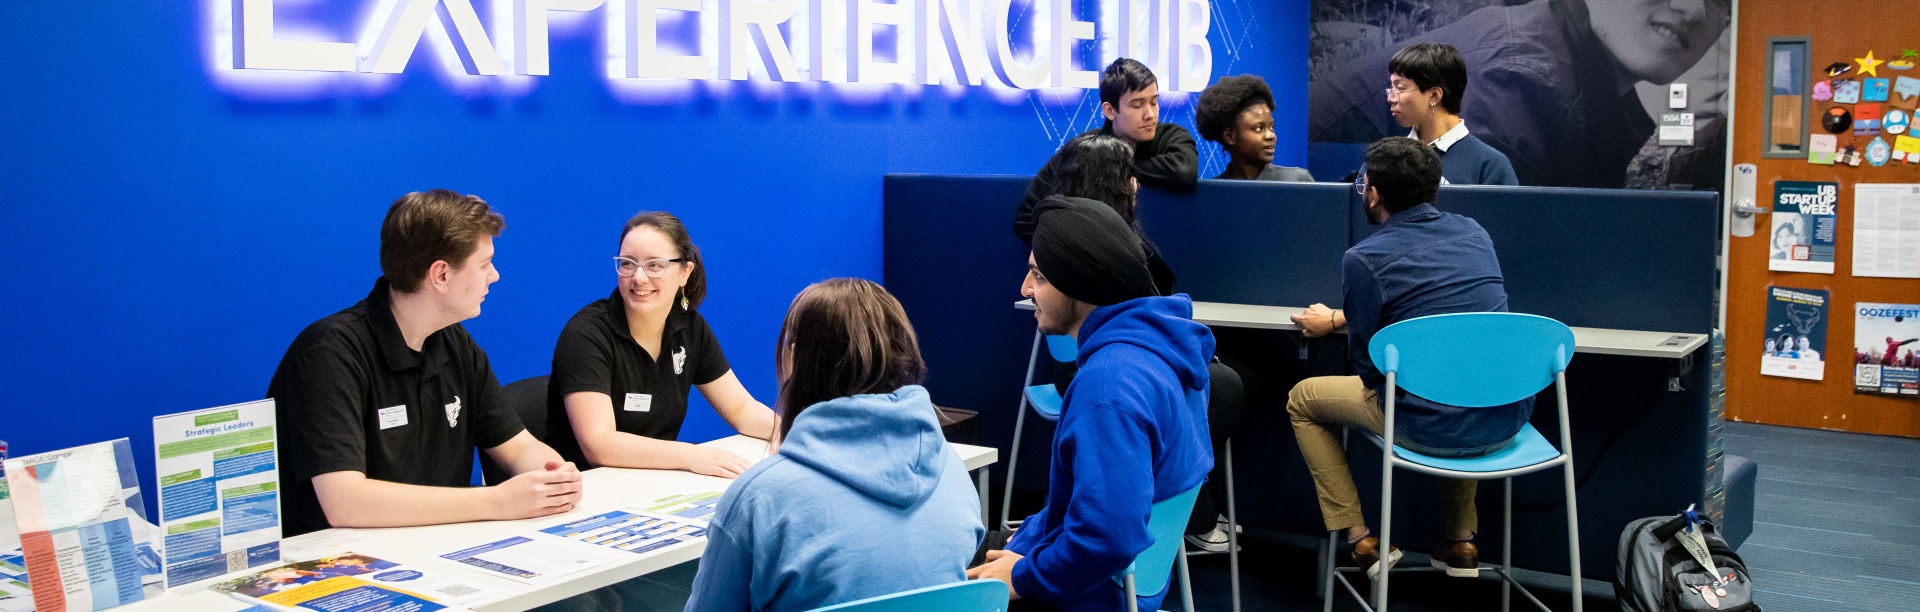 The Student Engagement Ambassadors work as a team to promote learning by engaging students in various professional development experiences and mentoring students looking to expand their involvement at UB. 